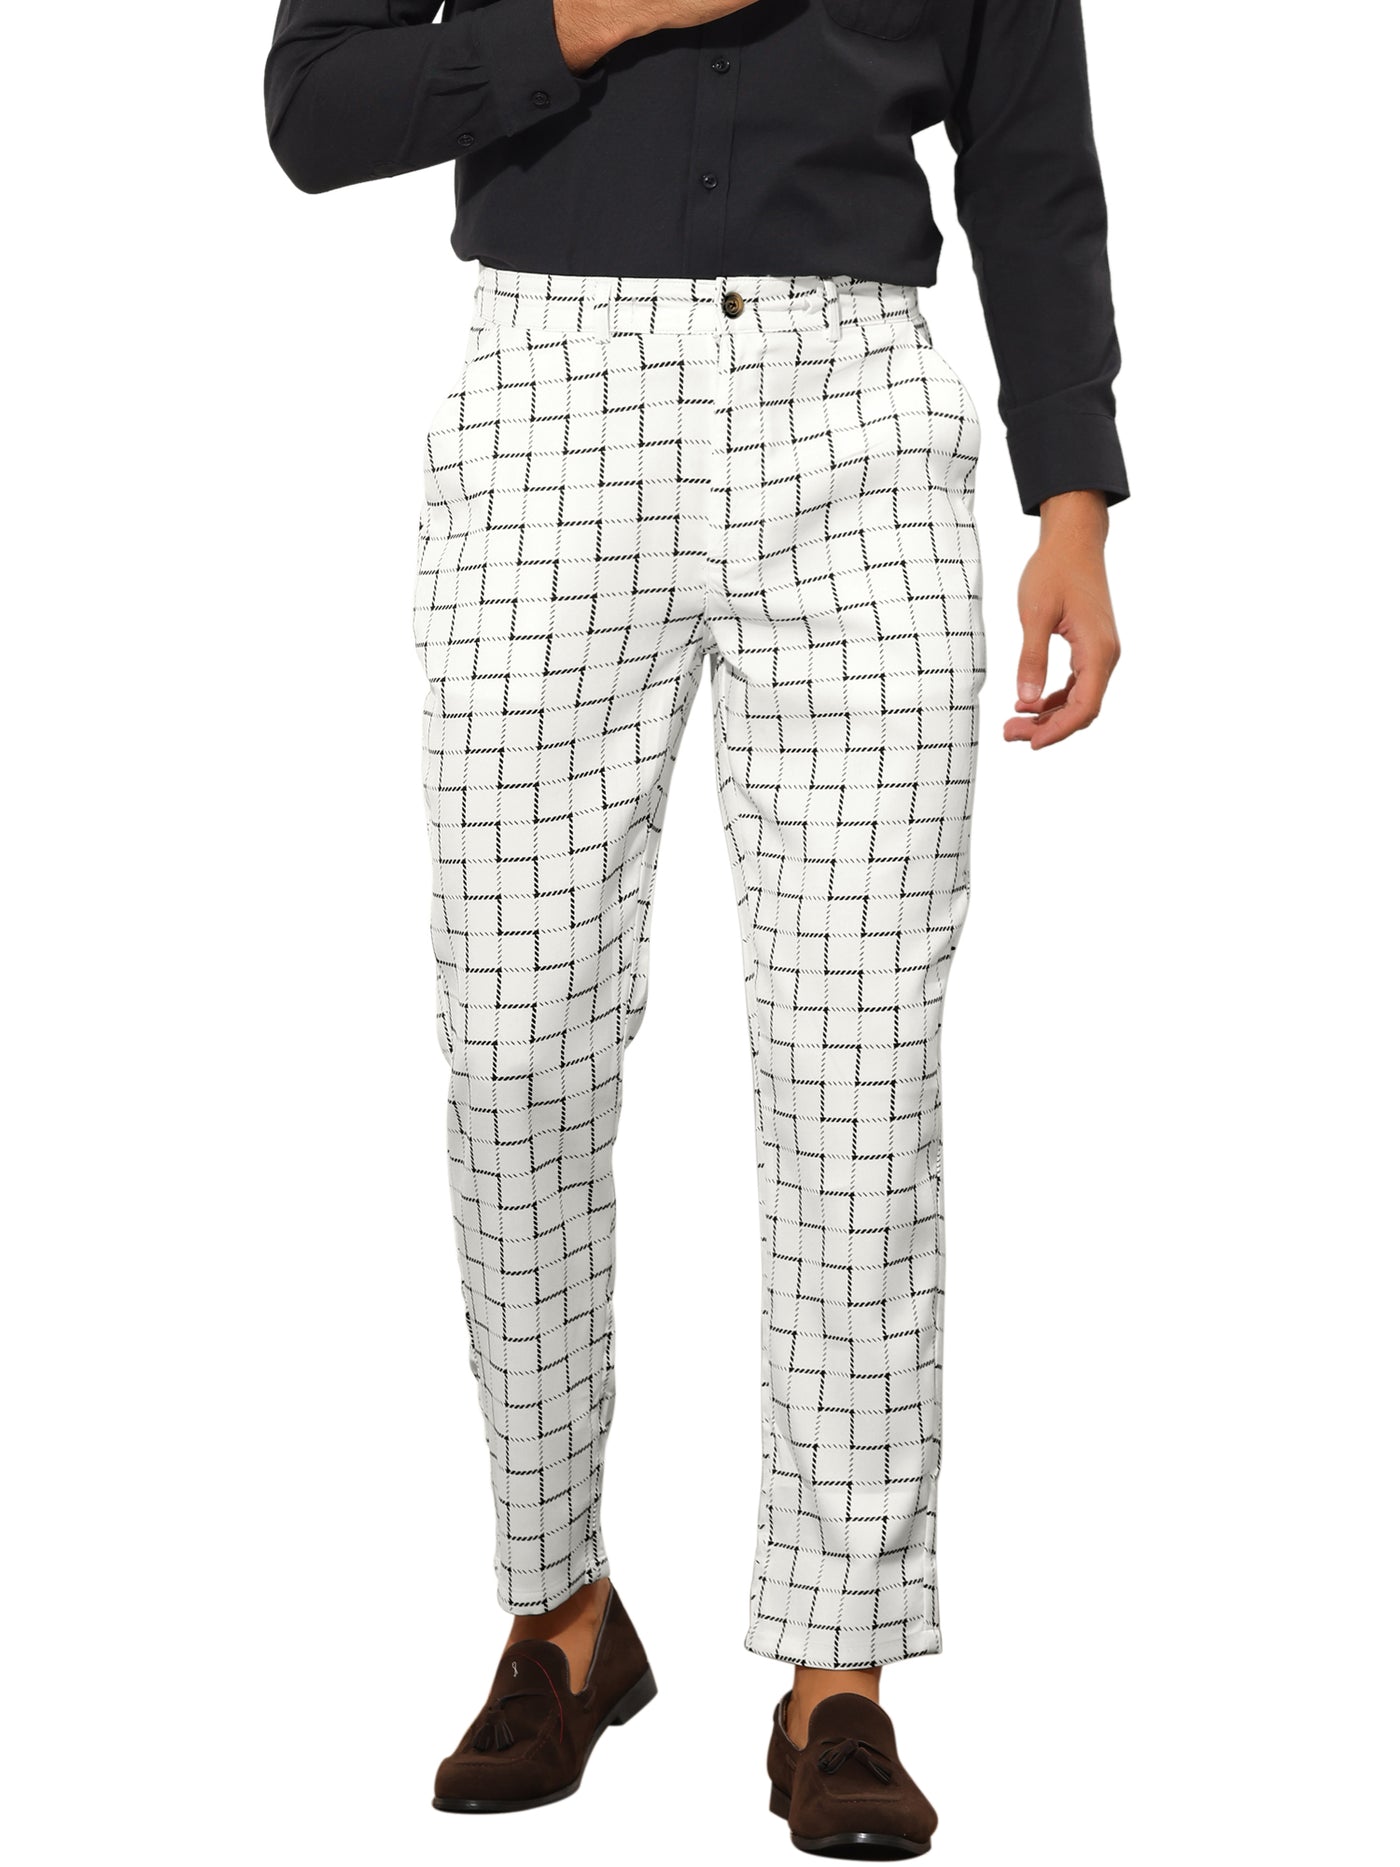 Bublédon Plaid Pants for Men's Checked Flat Front Slim Fit Tapered Formal Trousers